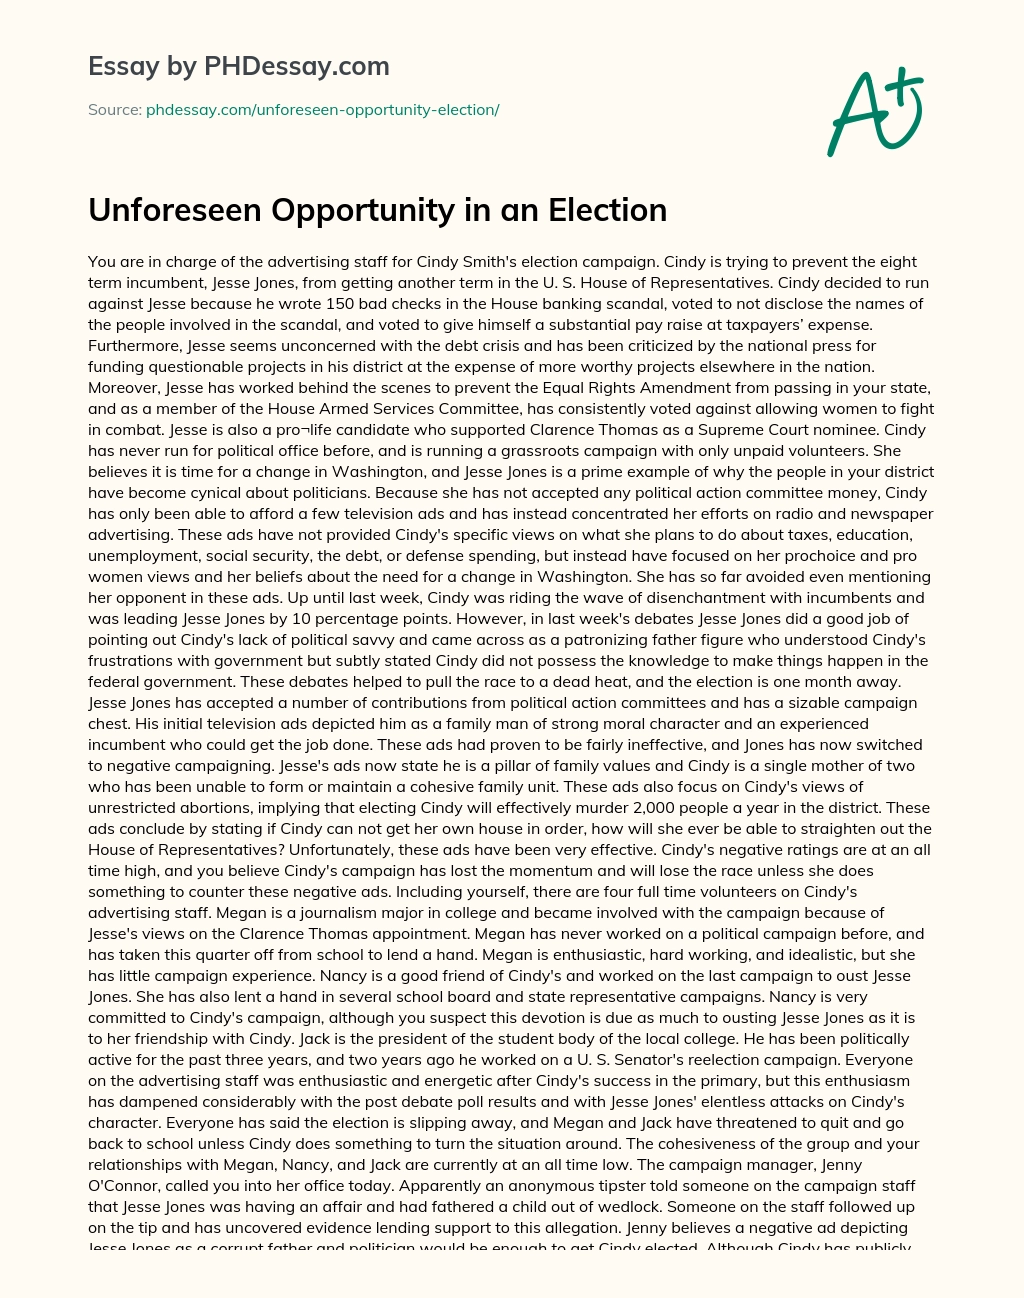 Unforeseen Opportunity in an Election essay